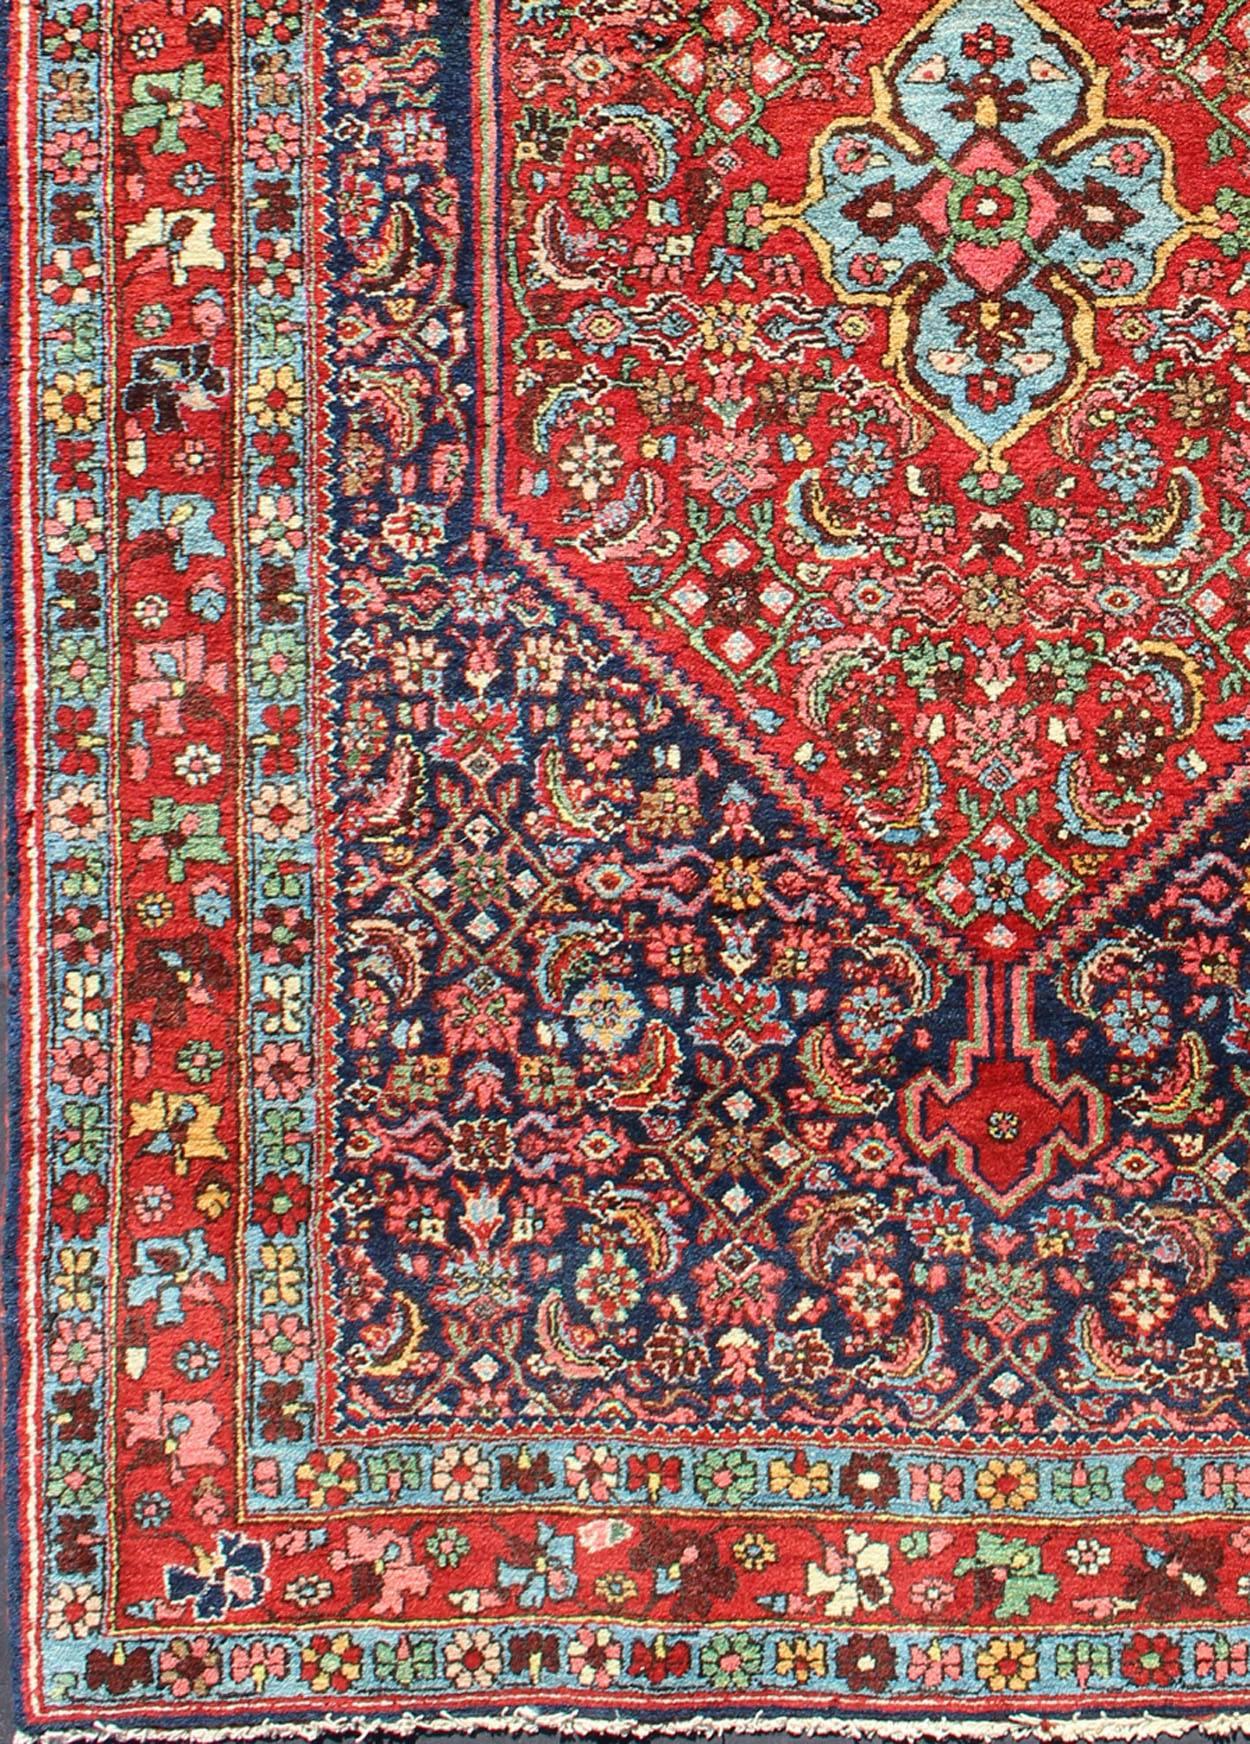 Beautiful Antique Geometric Bidjar With Diamond Medallion and Blue Background and Red border, rug/B-0508, type/ Persian.
This beautiful small rug features a Classic Bidjar format characterized by a navy blue, diamond-shaped medallion set on a red